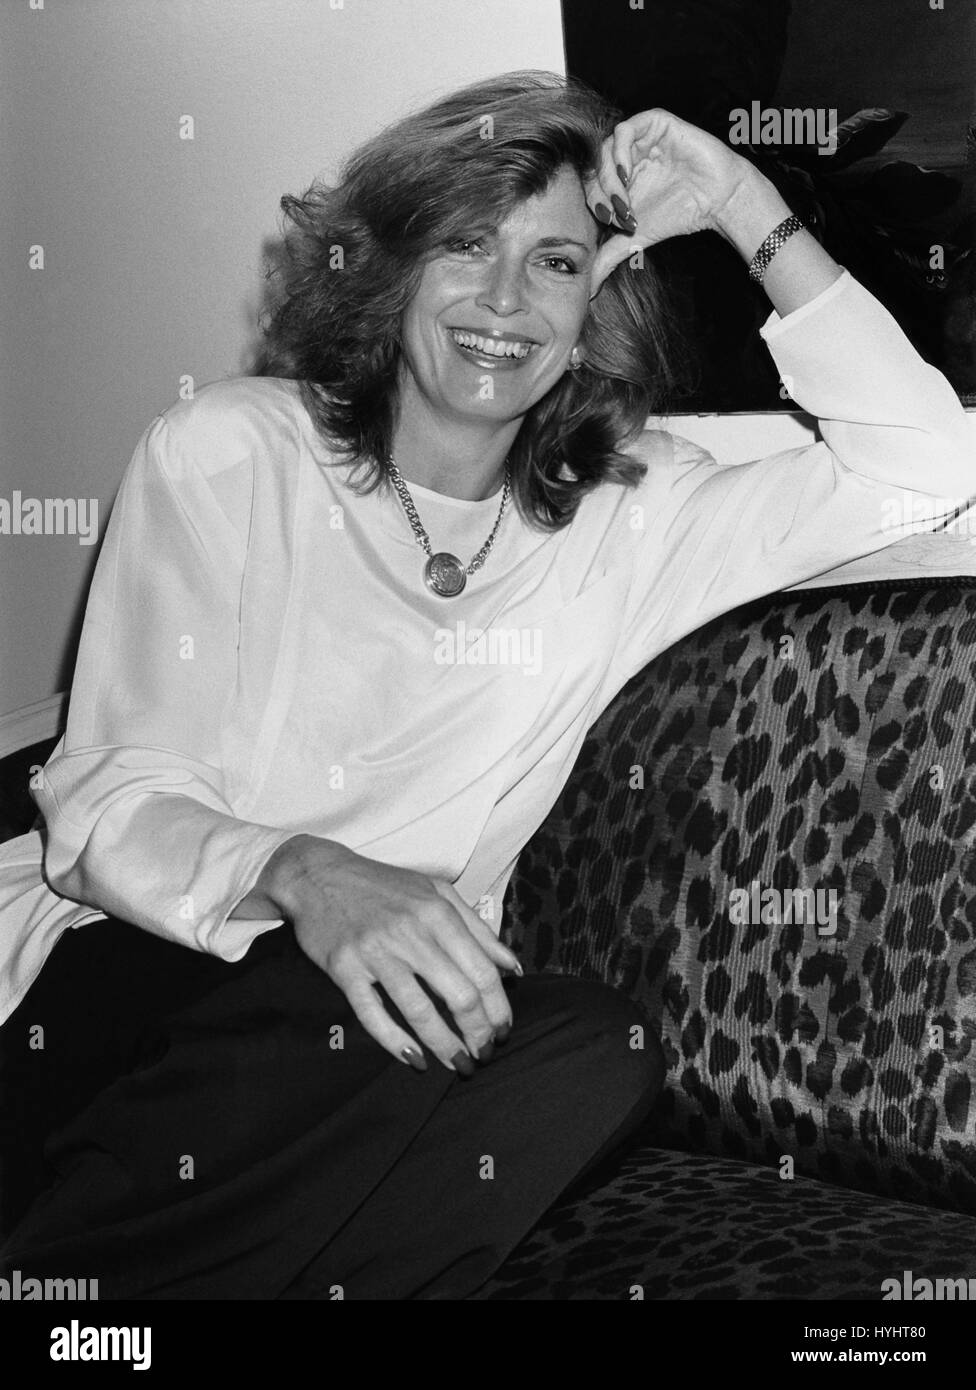 Joanna Cassidy American Actress In Stockholm Promoting The Movie Who Stock Photo Alamy